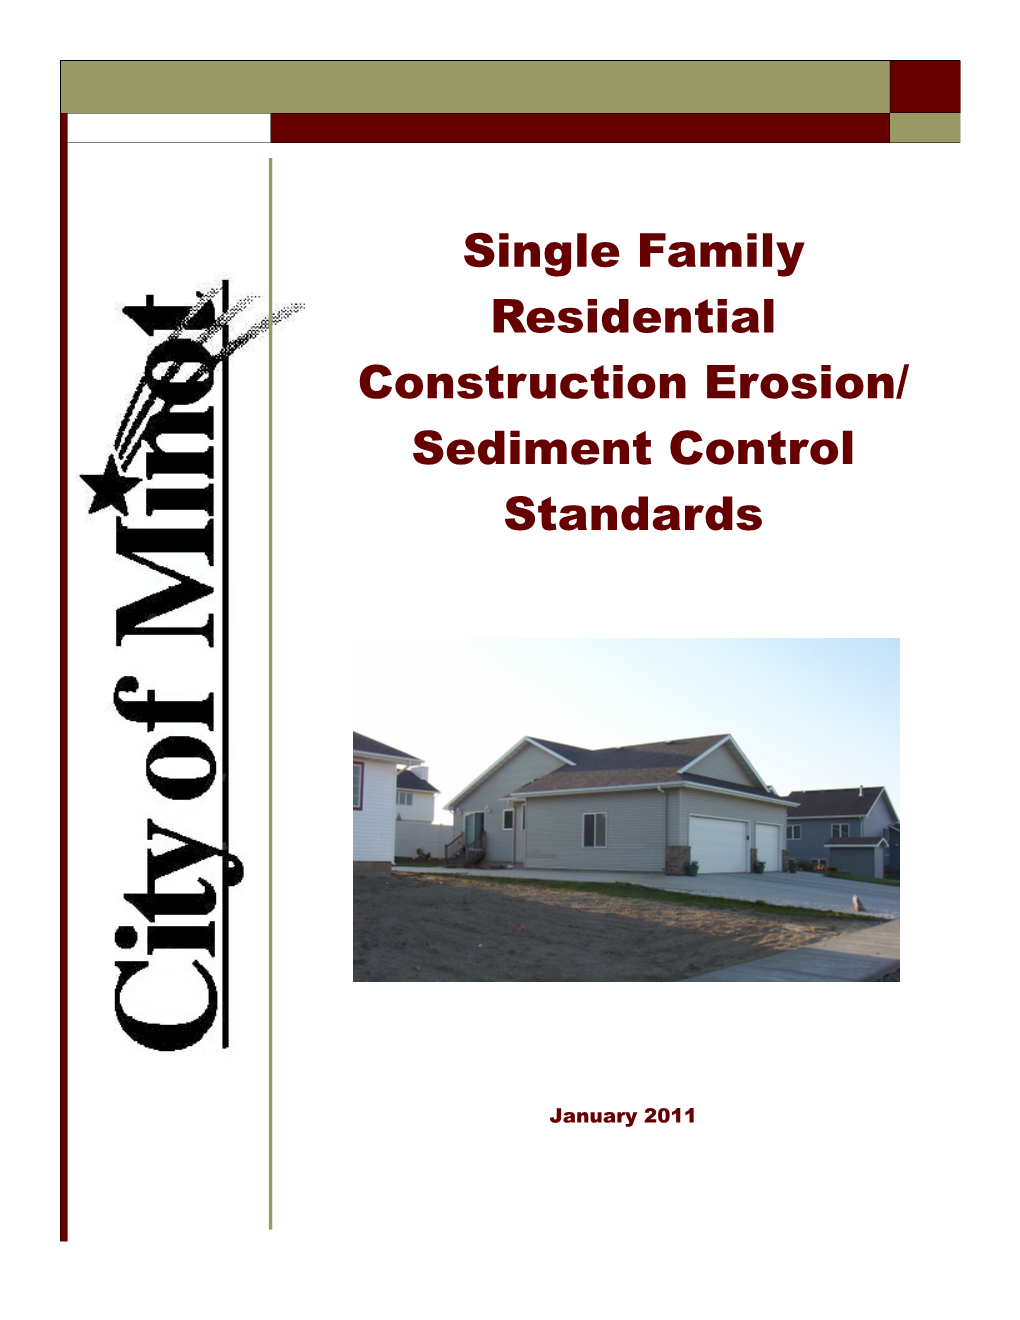 Single Family Residential Construction Erosion/ Sediment Control Standards